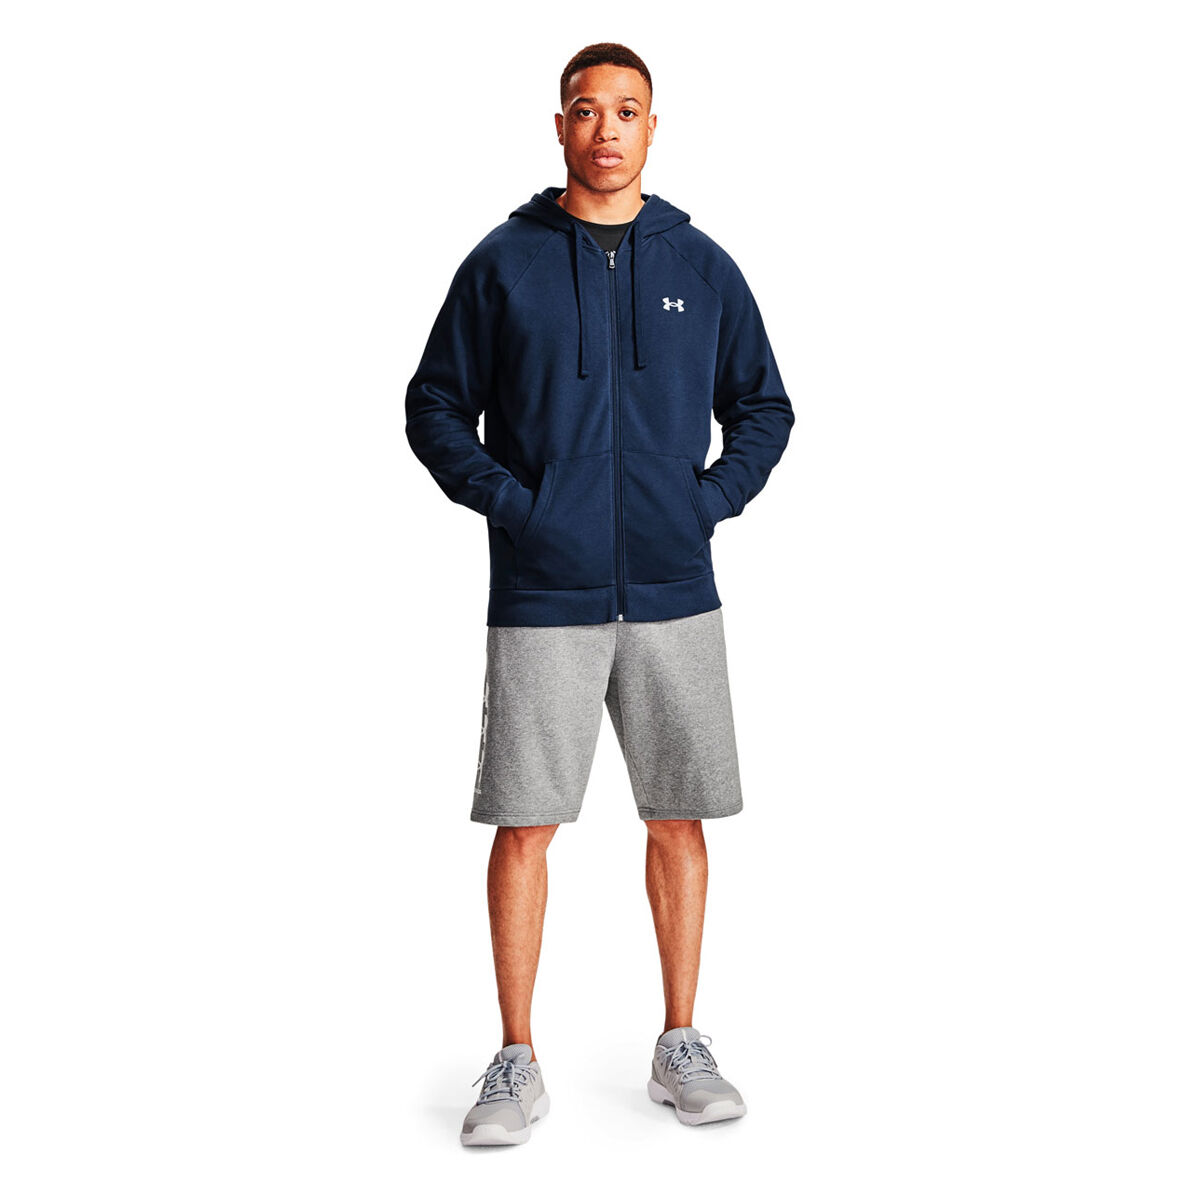 Under Armour Mens Rival Full Zip Cotton Hoodie